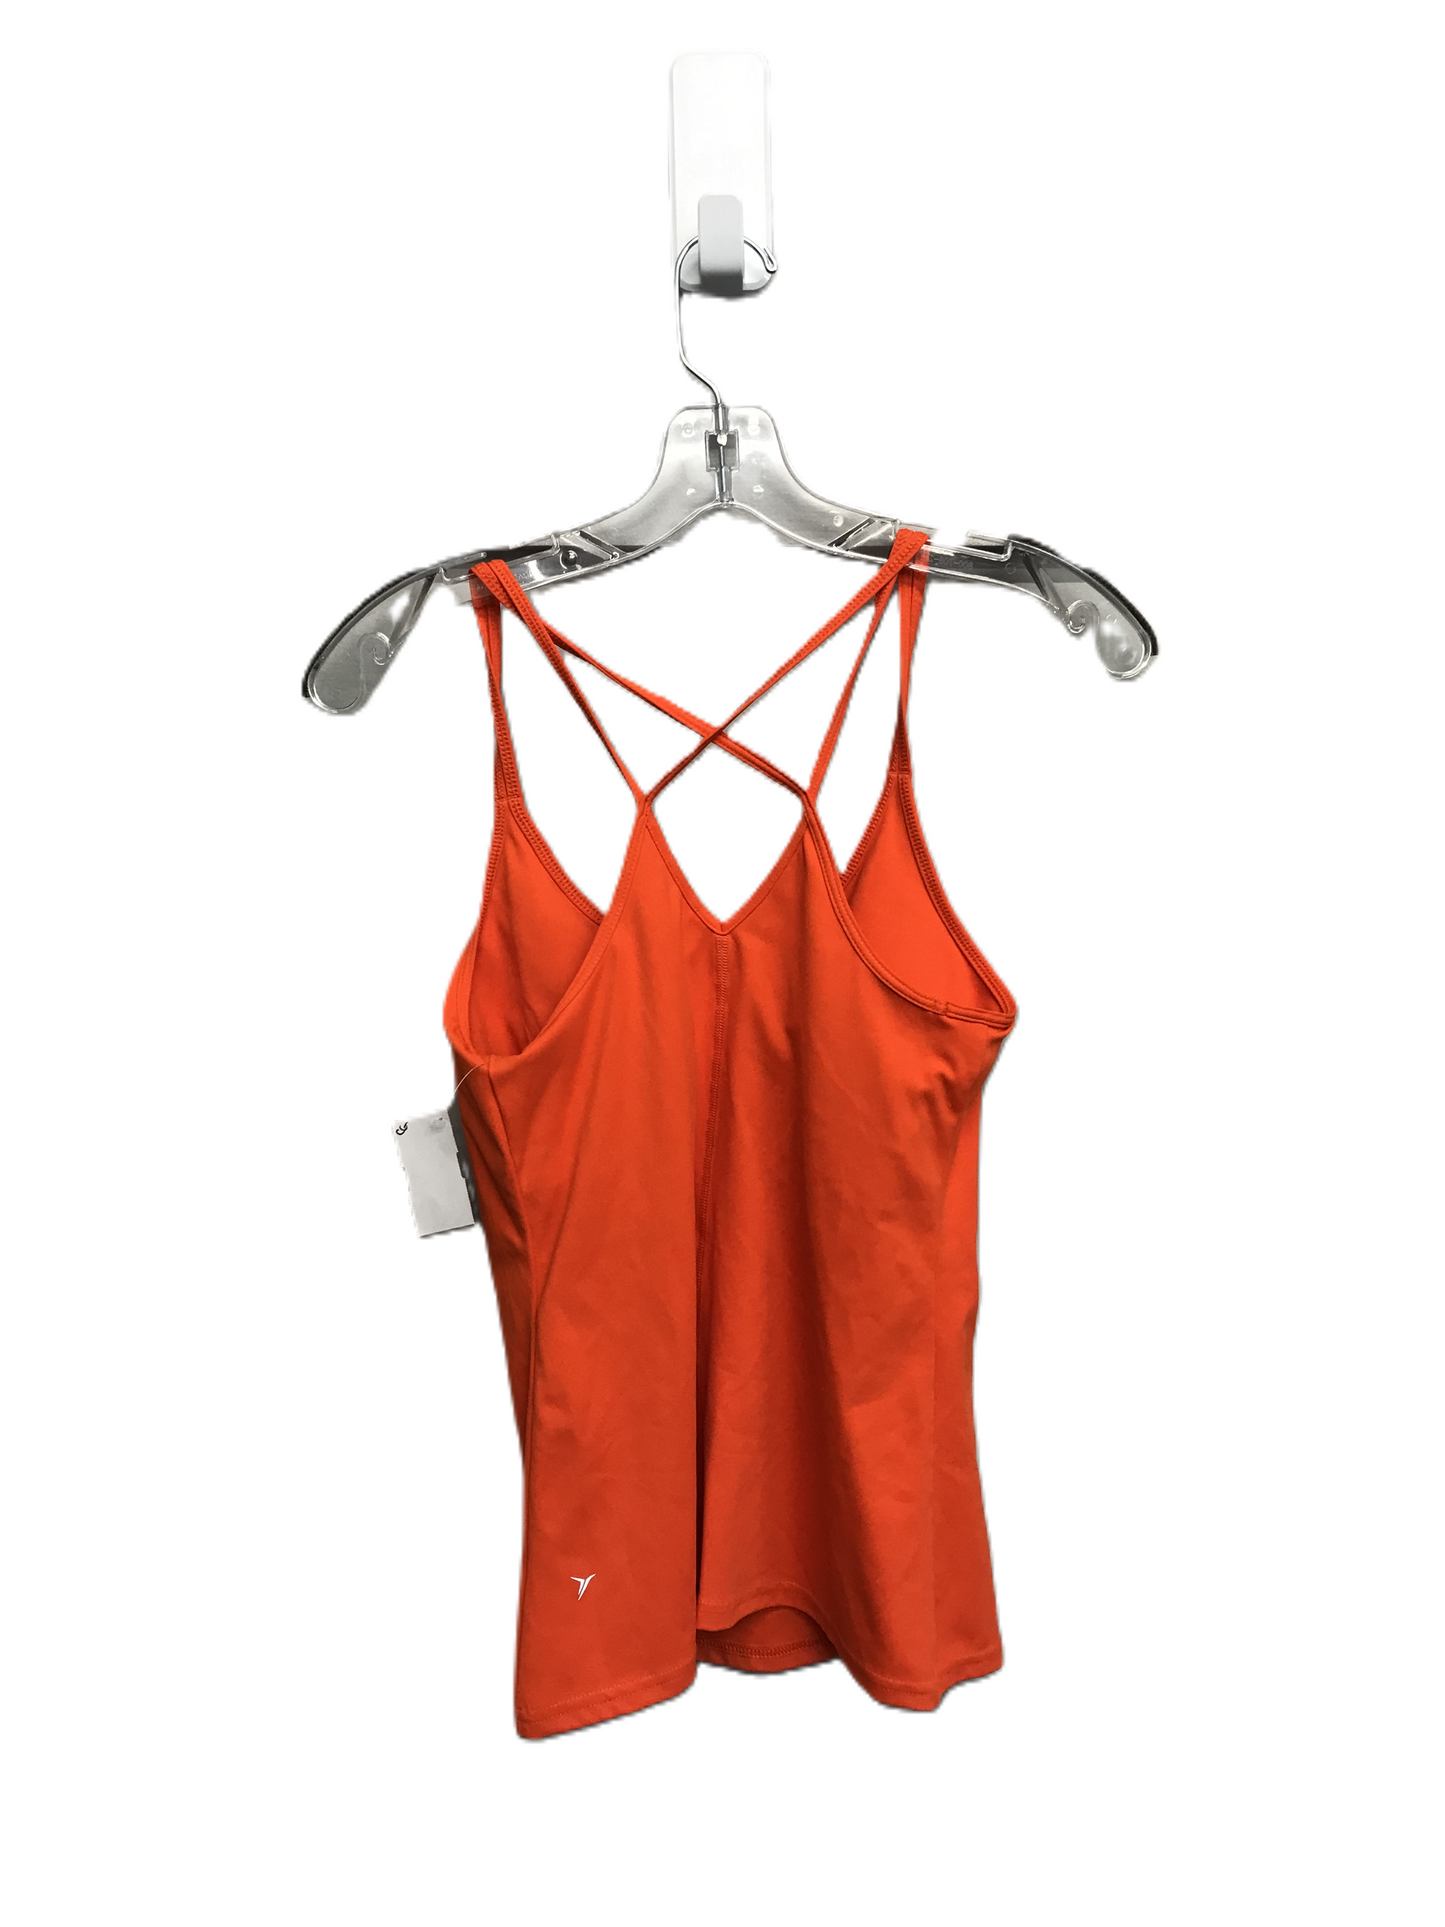 Orange Athletic Tank Top By Old Navy, Size: S